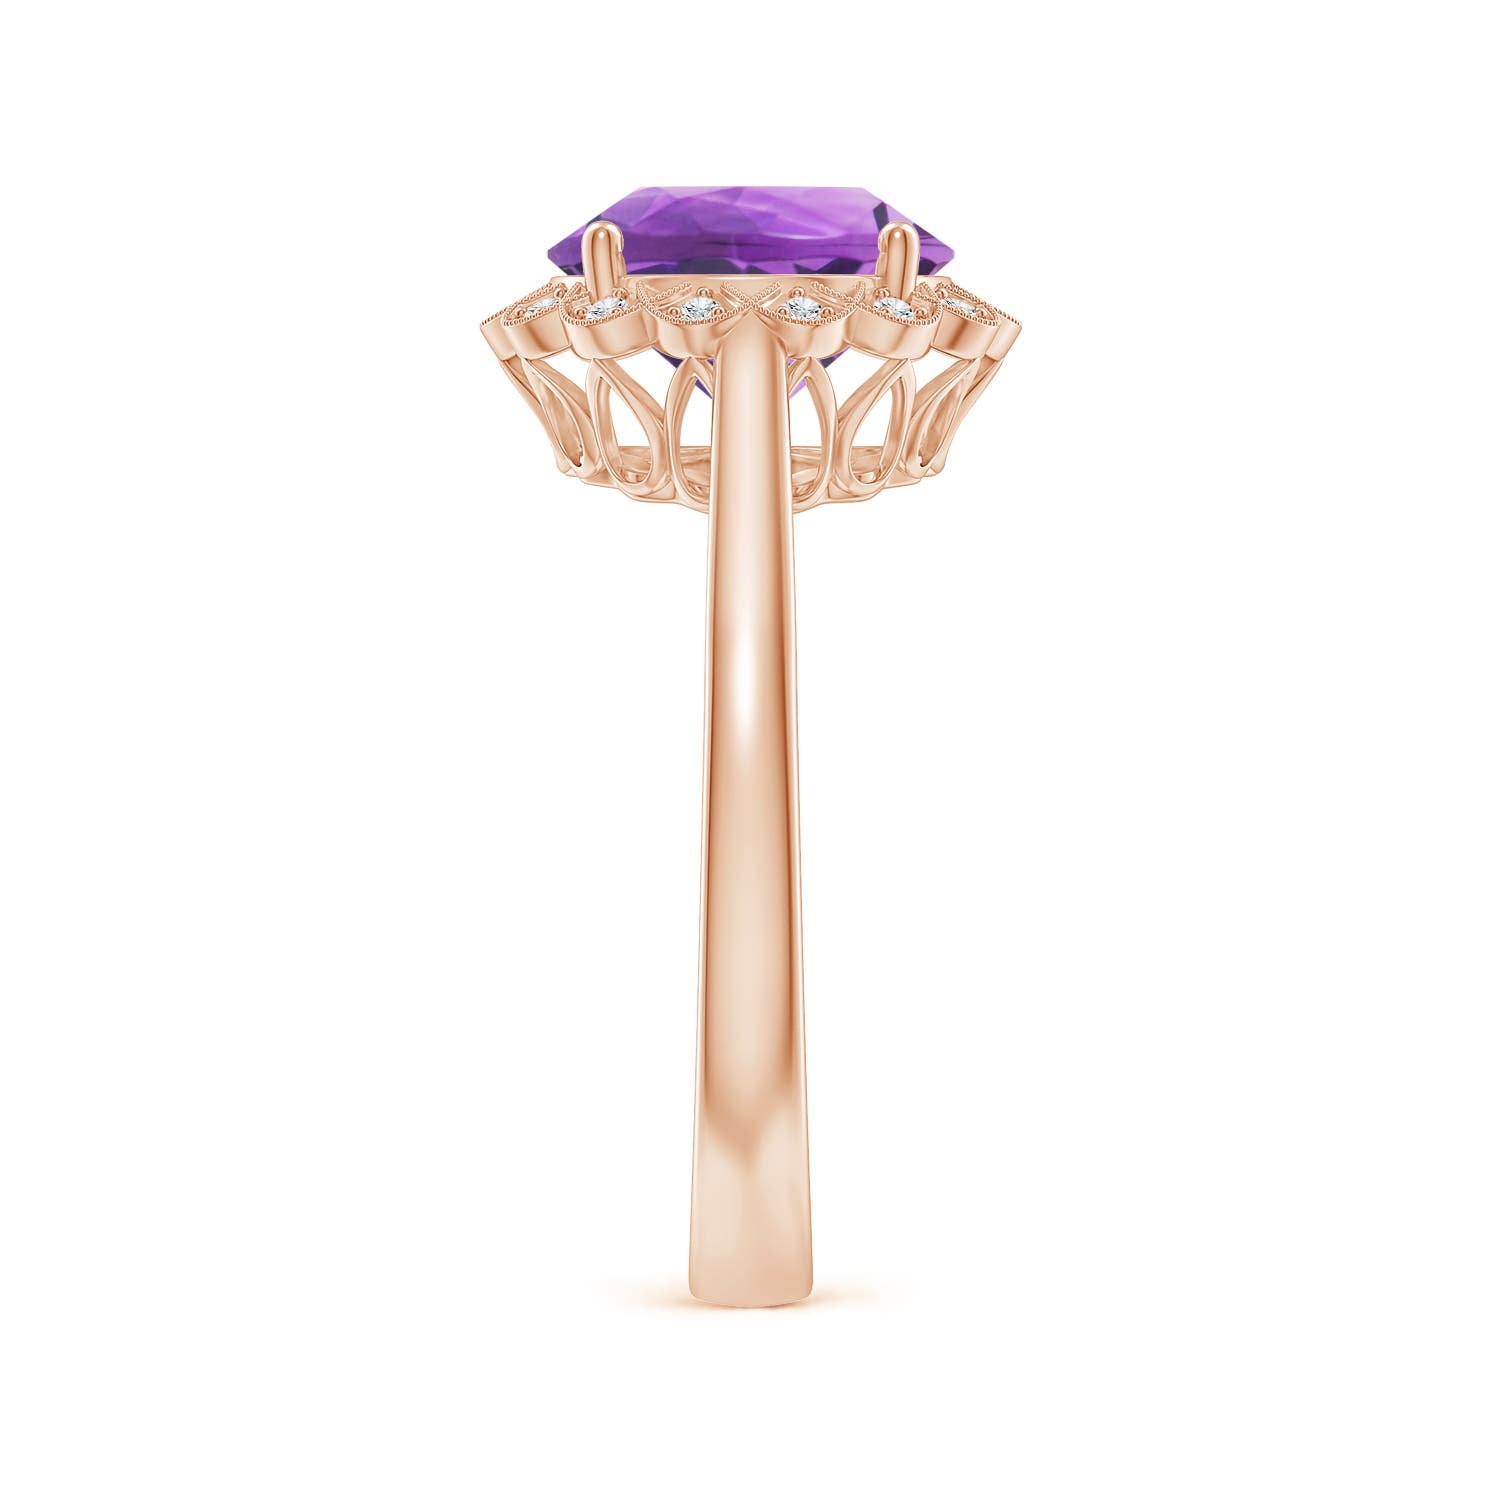 AA- Amethyst / 2.52 CT / 14 KT Rose Gold